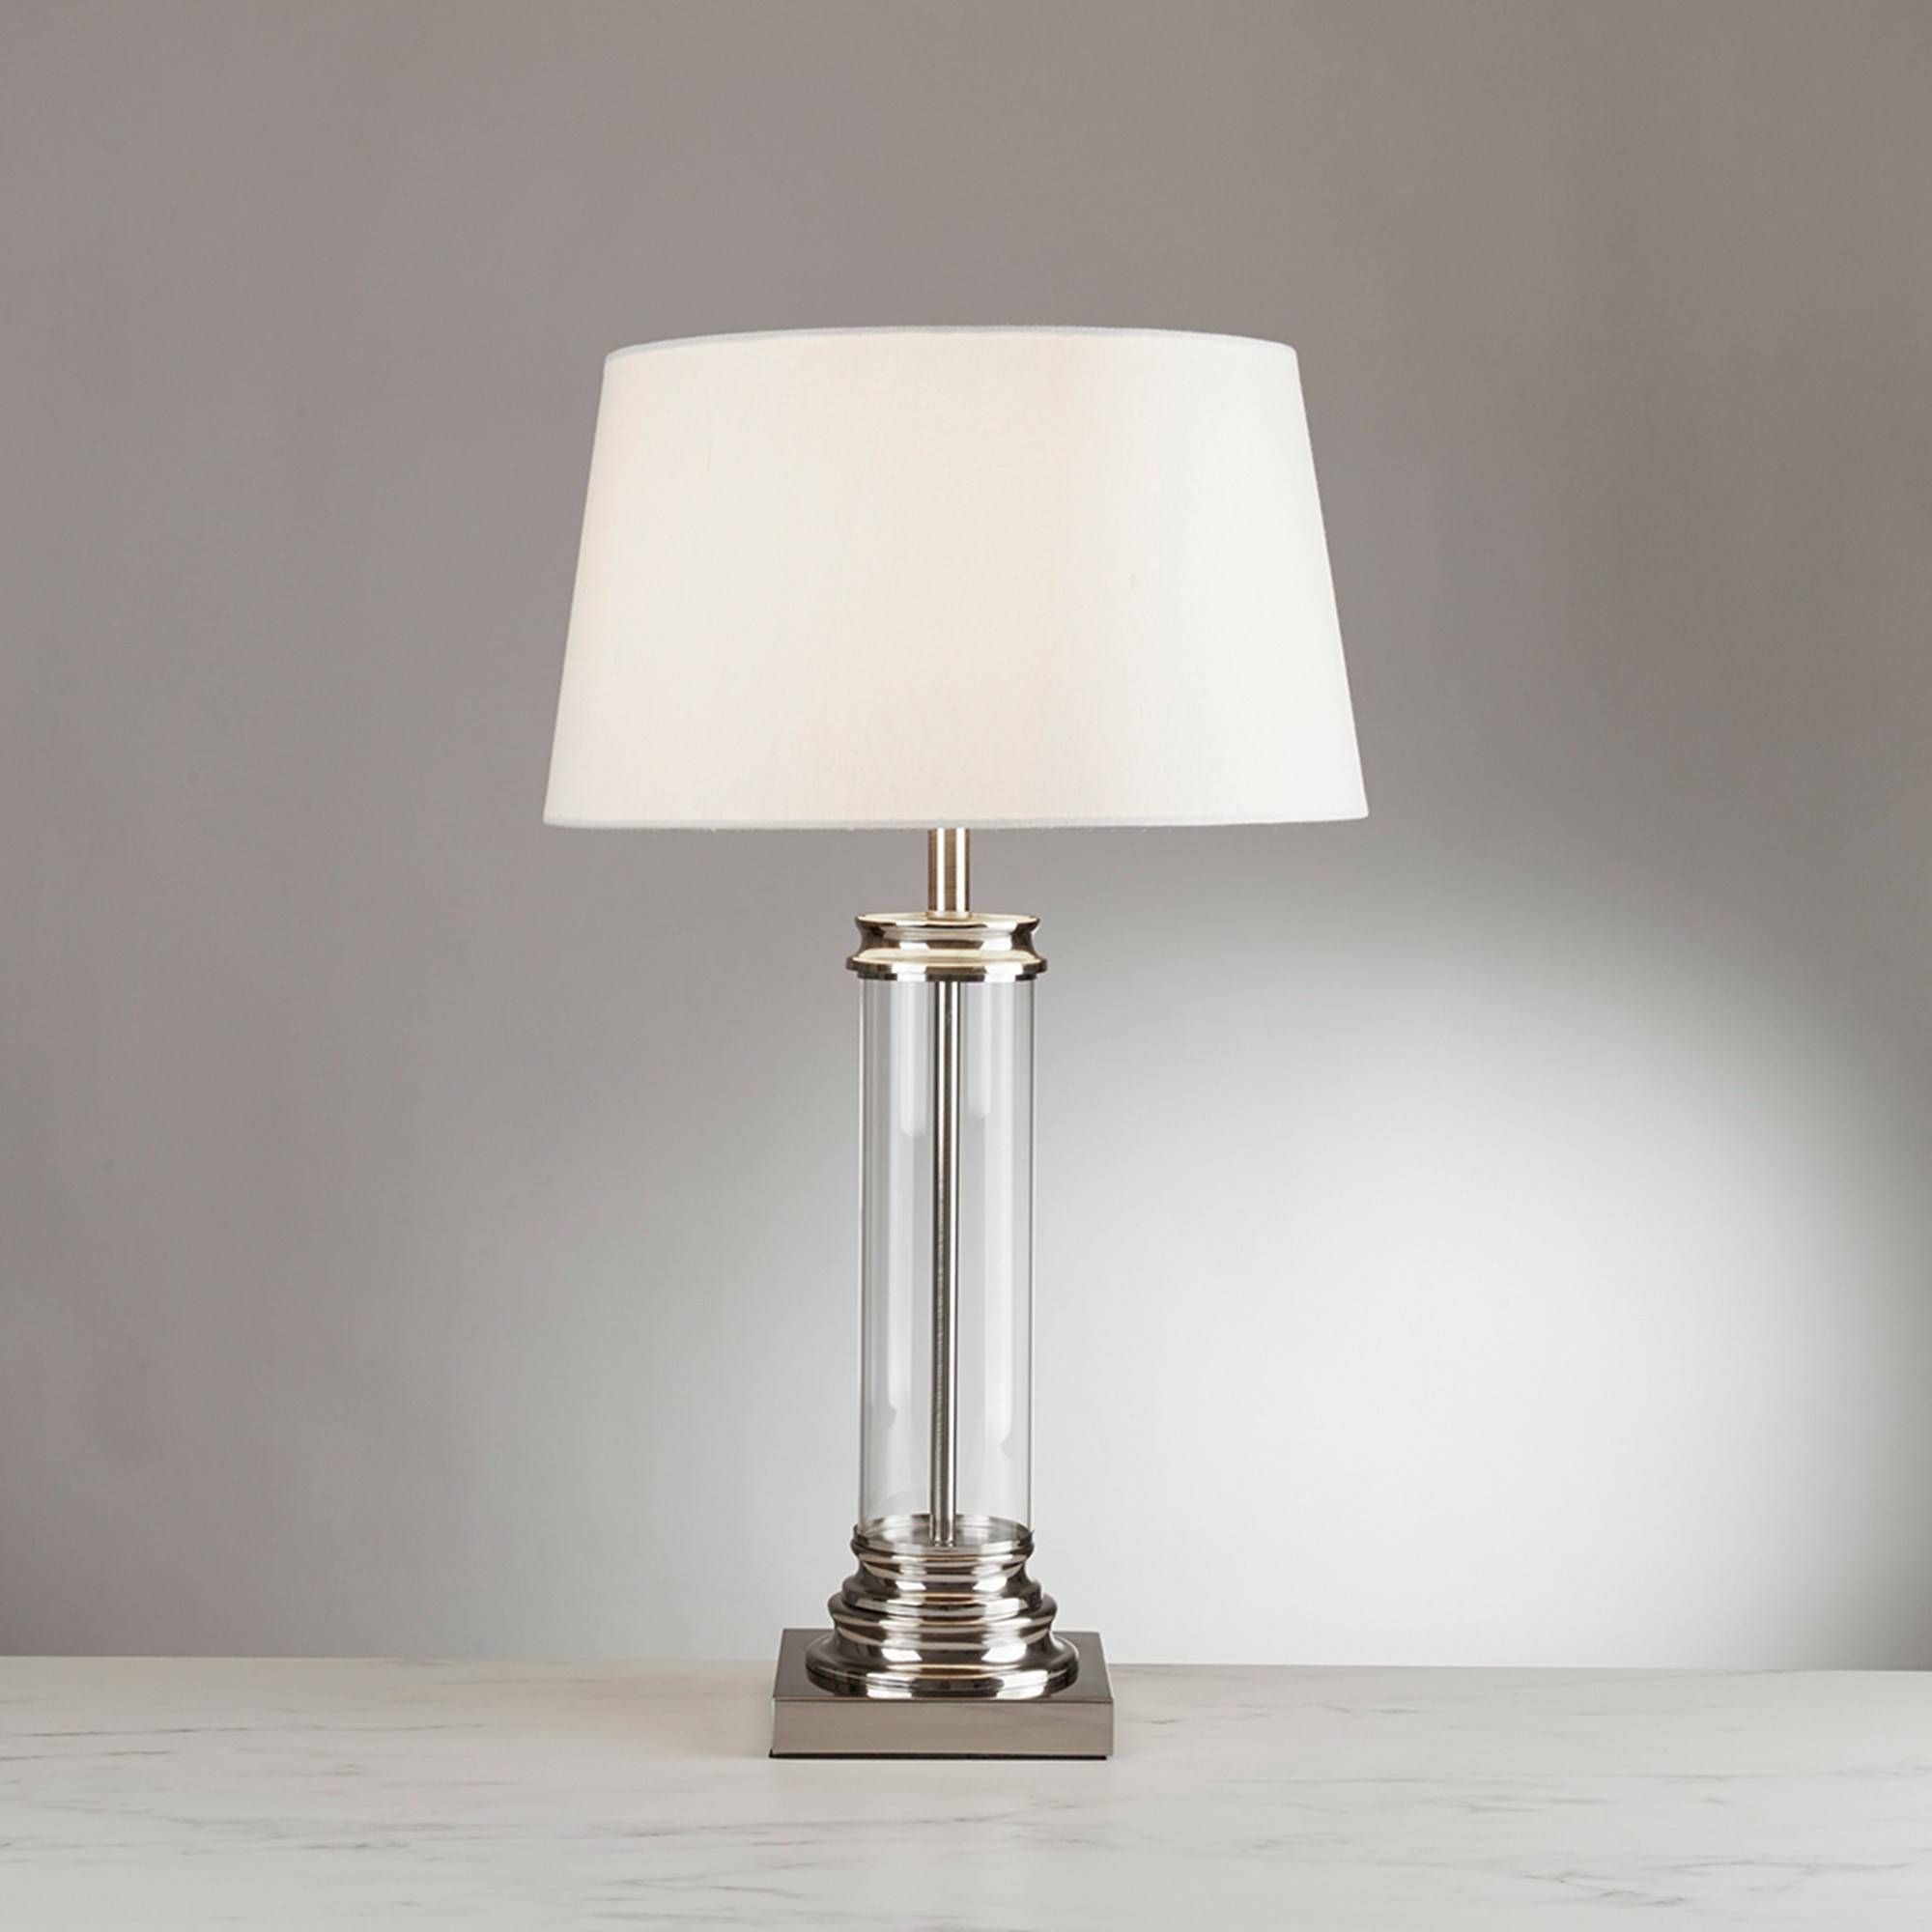 This satin silver vintage inspired table lamp is the perfect addition for a traditional living room or bedroom. The combination of the cream shade, glass column and satin silver base creates a real feeling of sophistication. The clear glass column provides a clean and neat feel which is sure to enhance its surroundings. The fitting has a minimalistic yet elegant look. Class two. Also available in an antique brass finish. Complete with a separate switch on the cable for your convenience. The table lamp is available with a European plug; please contact us for details. | Finish: Satin Silver, Clear | Material: Glass, Fabric, Metal | IP Rating: IP20 | Height (cm): 62 | Diameter (cm): 37 | No. of Lights: 1 | Lamp Type: E27 LED | Wattage (max): 10